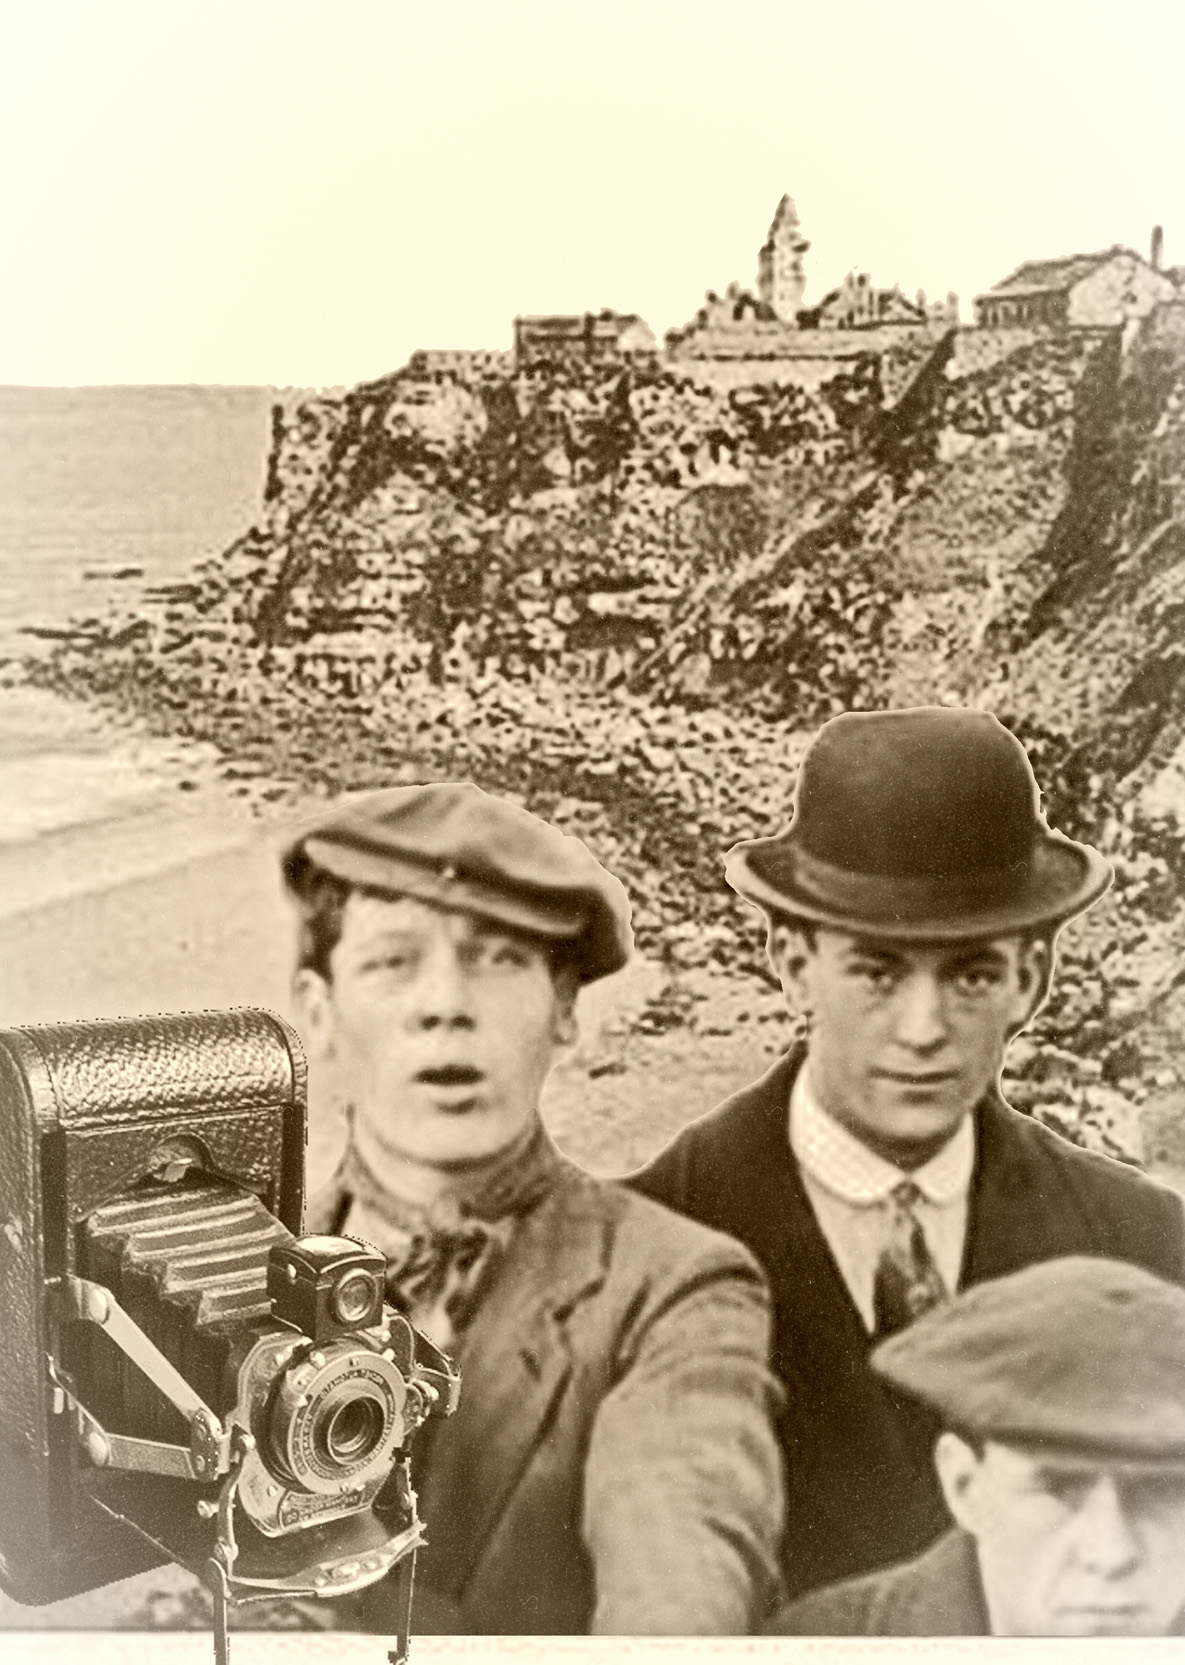 Beers brothers at Tynemouth photo collage reimagining